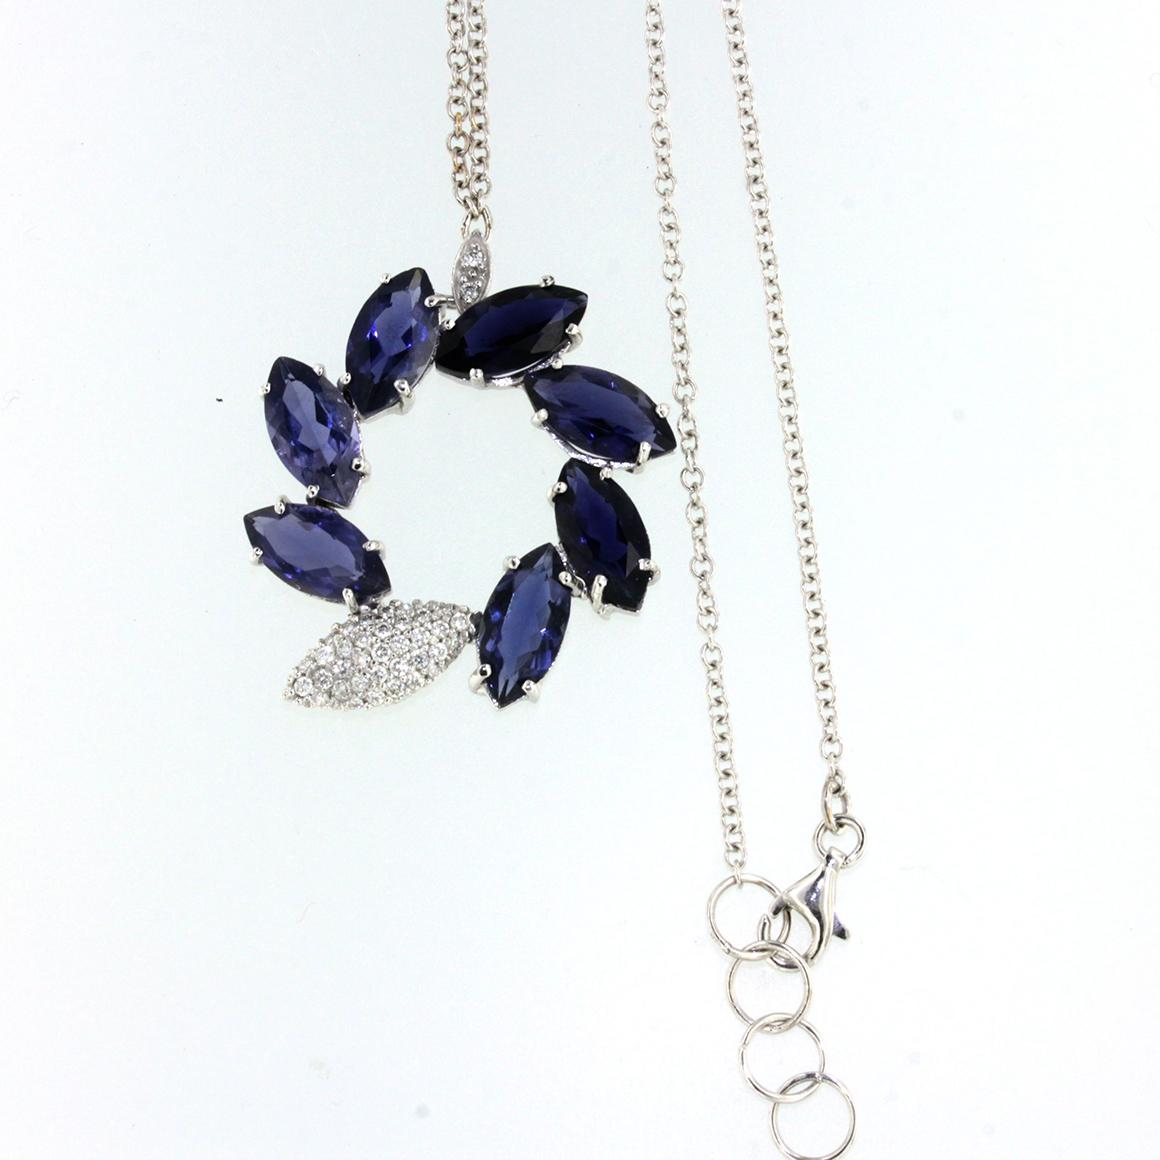 Sunflowers are symbols of sun and happiness. It takes inspiration from modern shapes and Nature
Necklace composed by pendant with chain in 18k white gold with Iolite (marquise cut, size: 6x12 mm) and white Diamonds cts 0,40 VS colour G/H.  cm 42